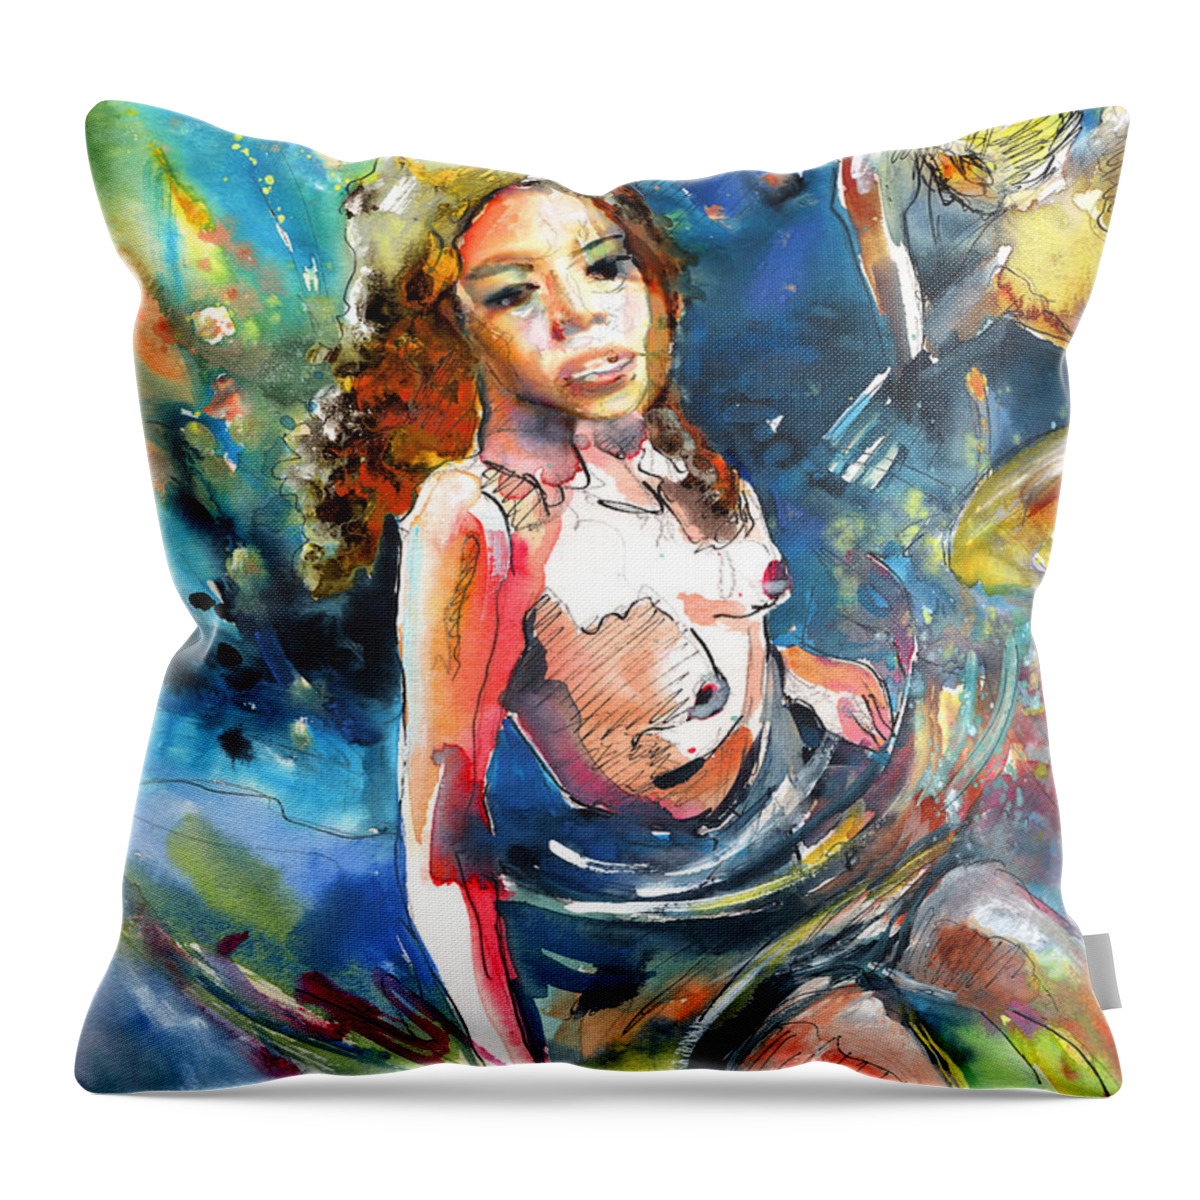 Women Throw Pillow featuring the painting Drowning in Love by Miki De Goodaboom